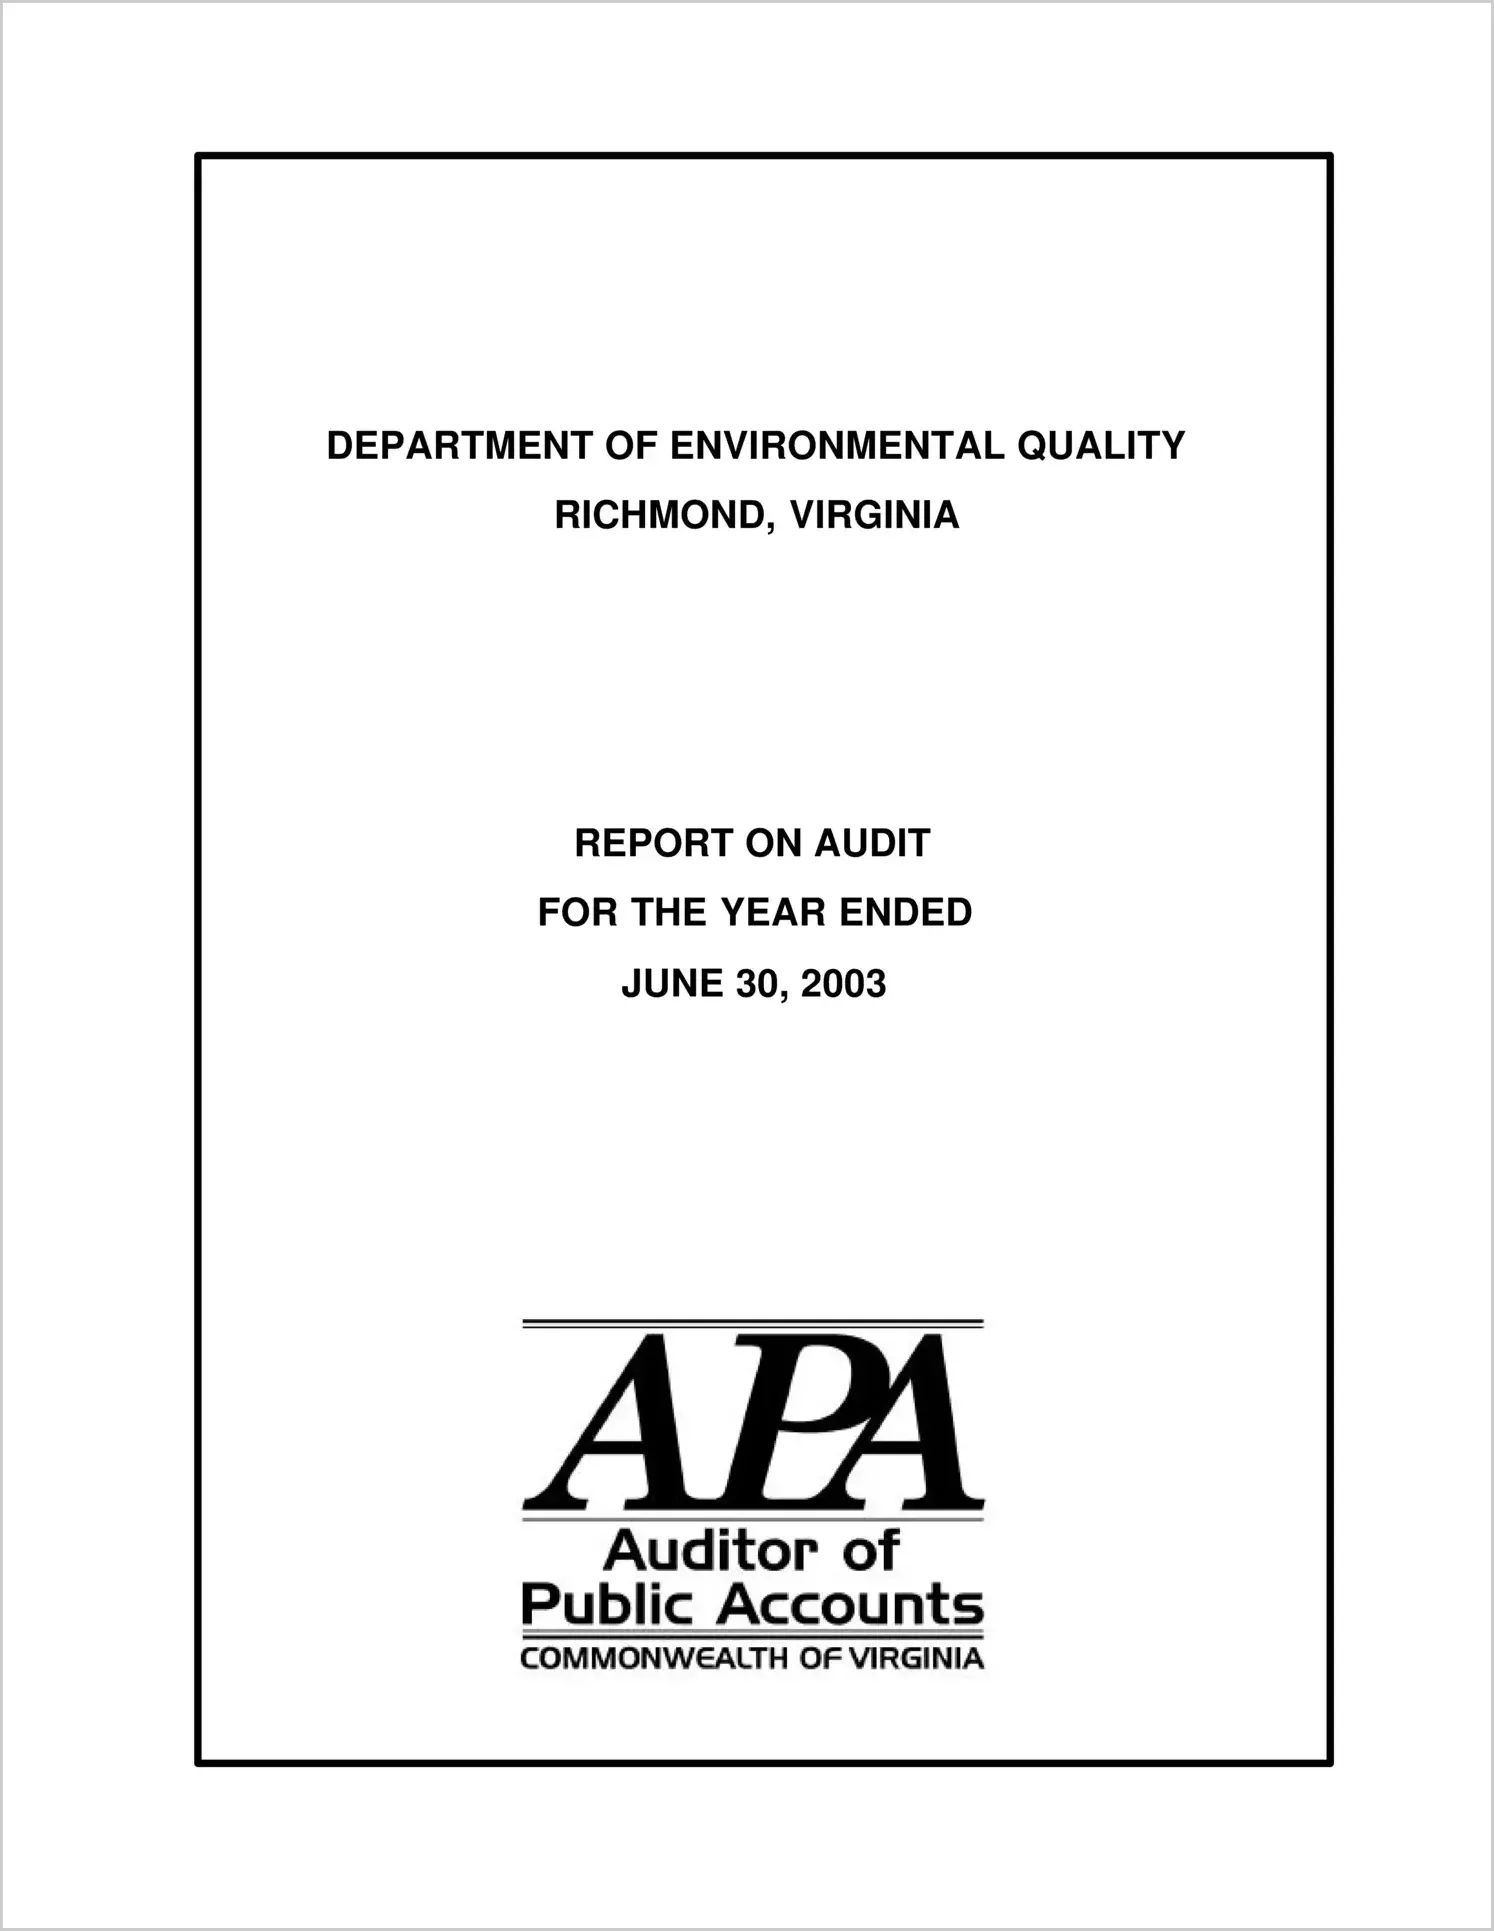 Department of Environmental Quality for the year ended June 30, 2003